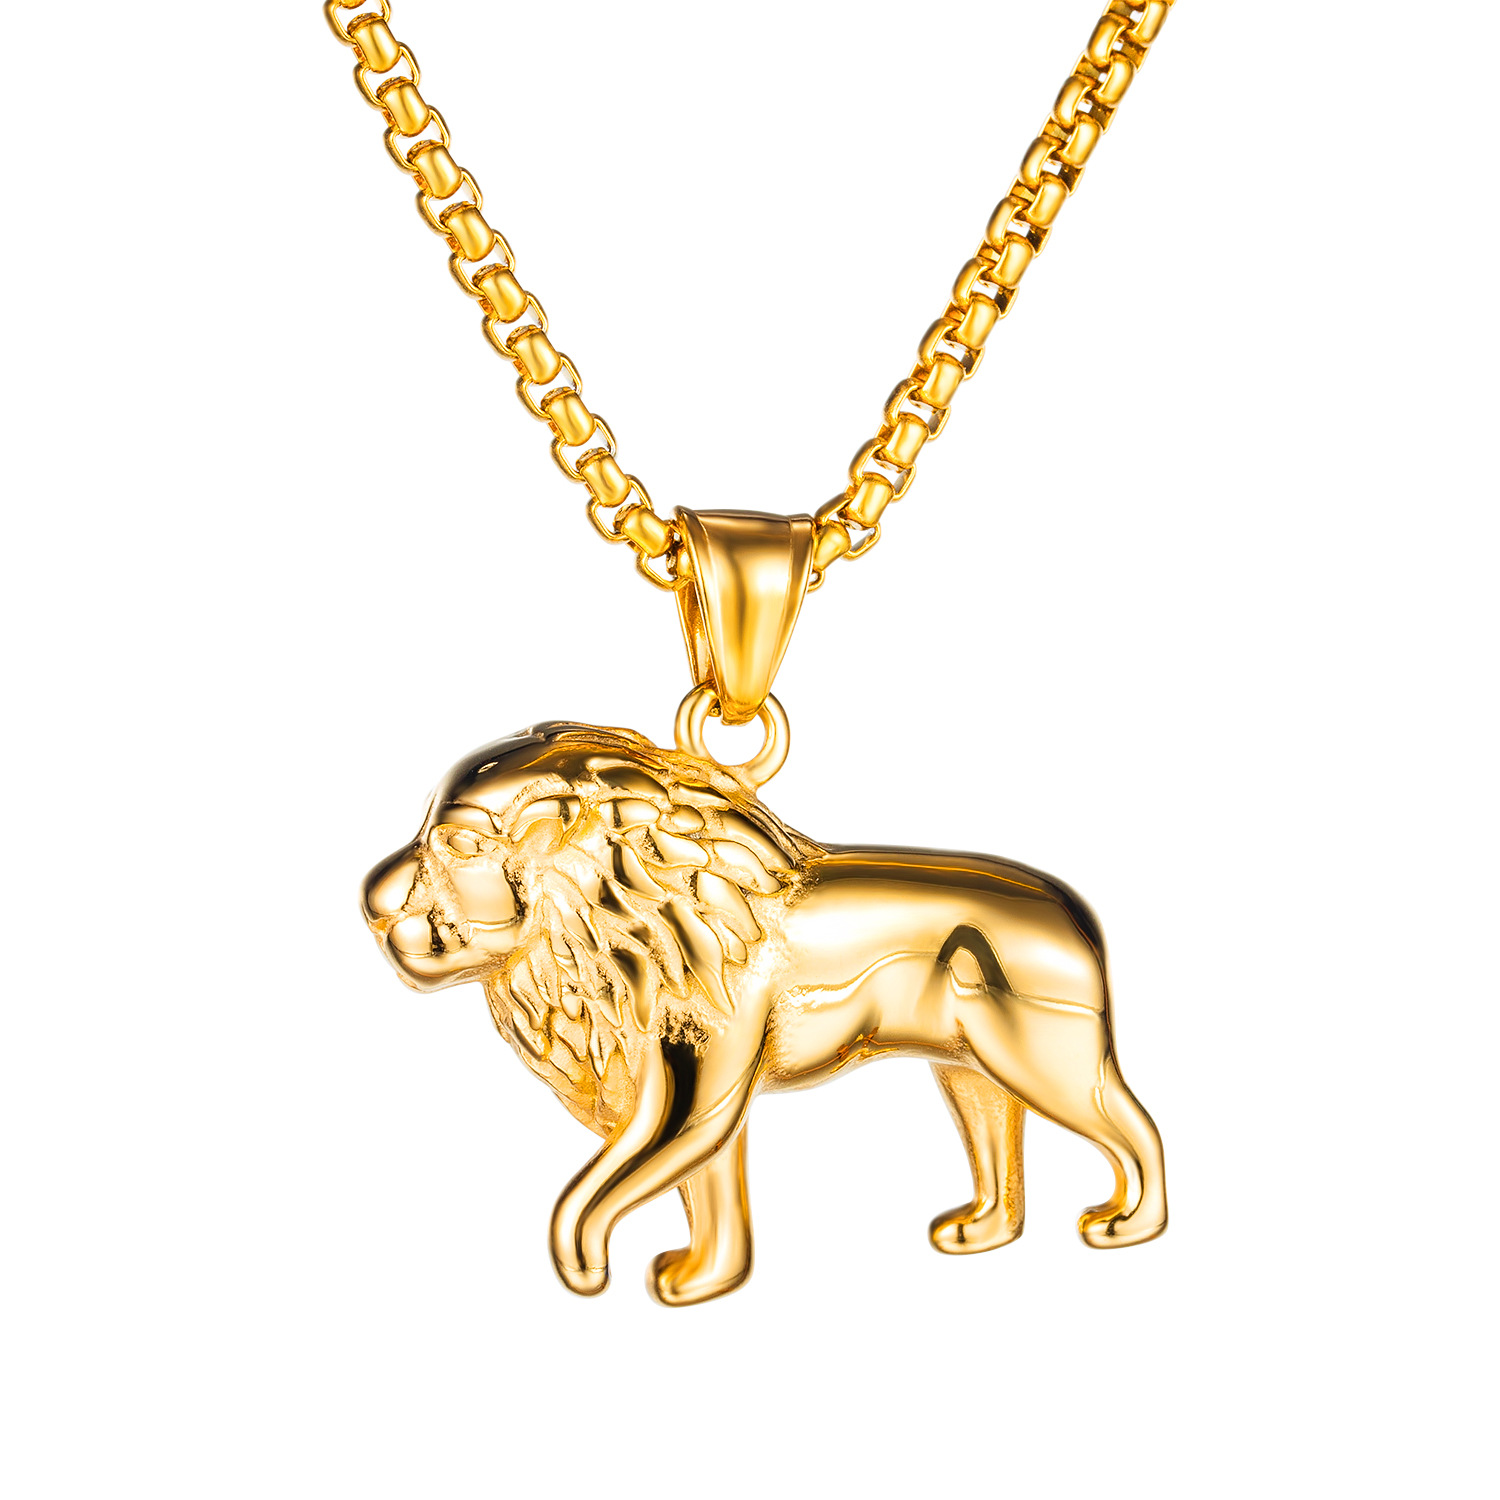 Electroplating gold pendant + distribution chain